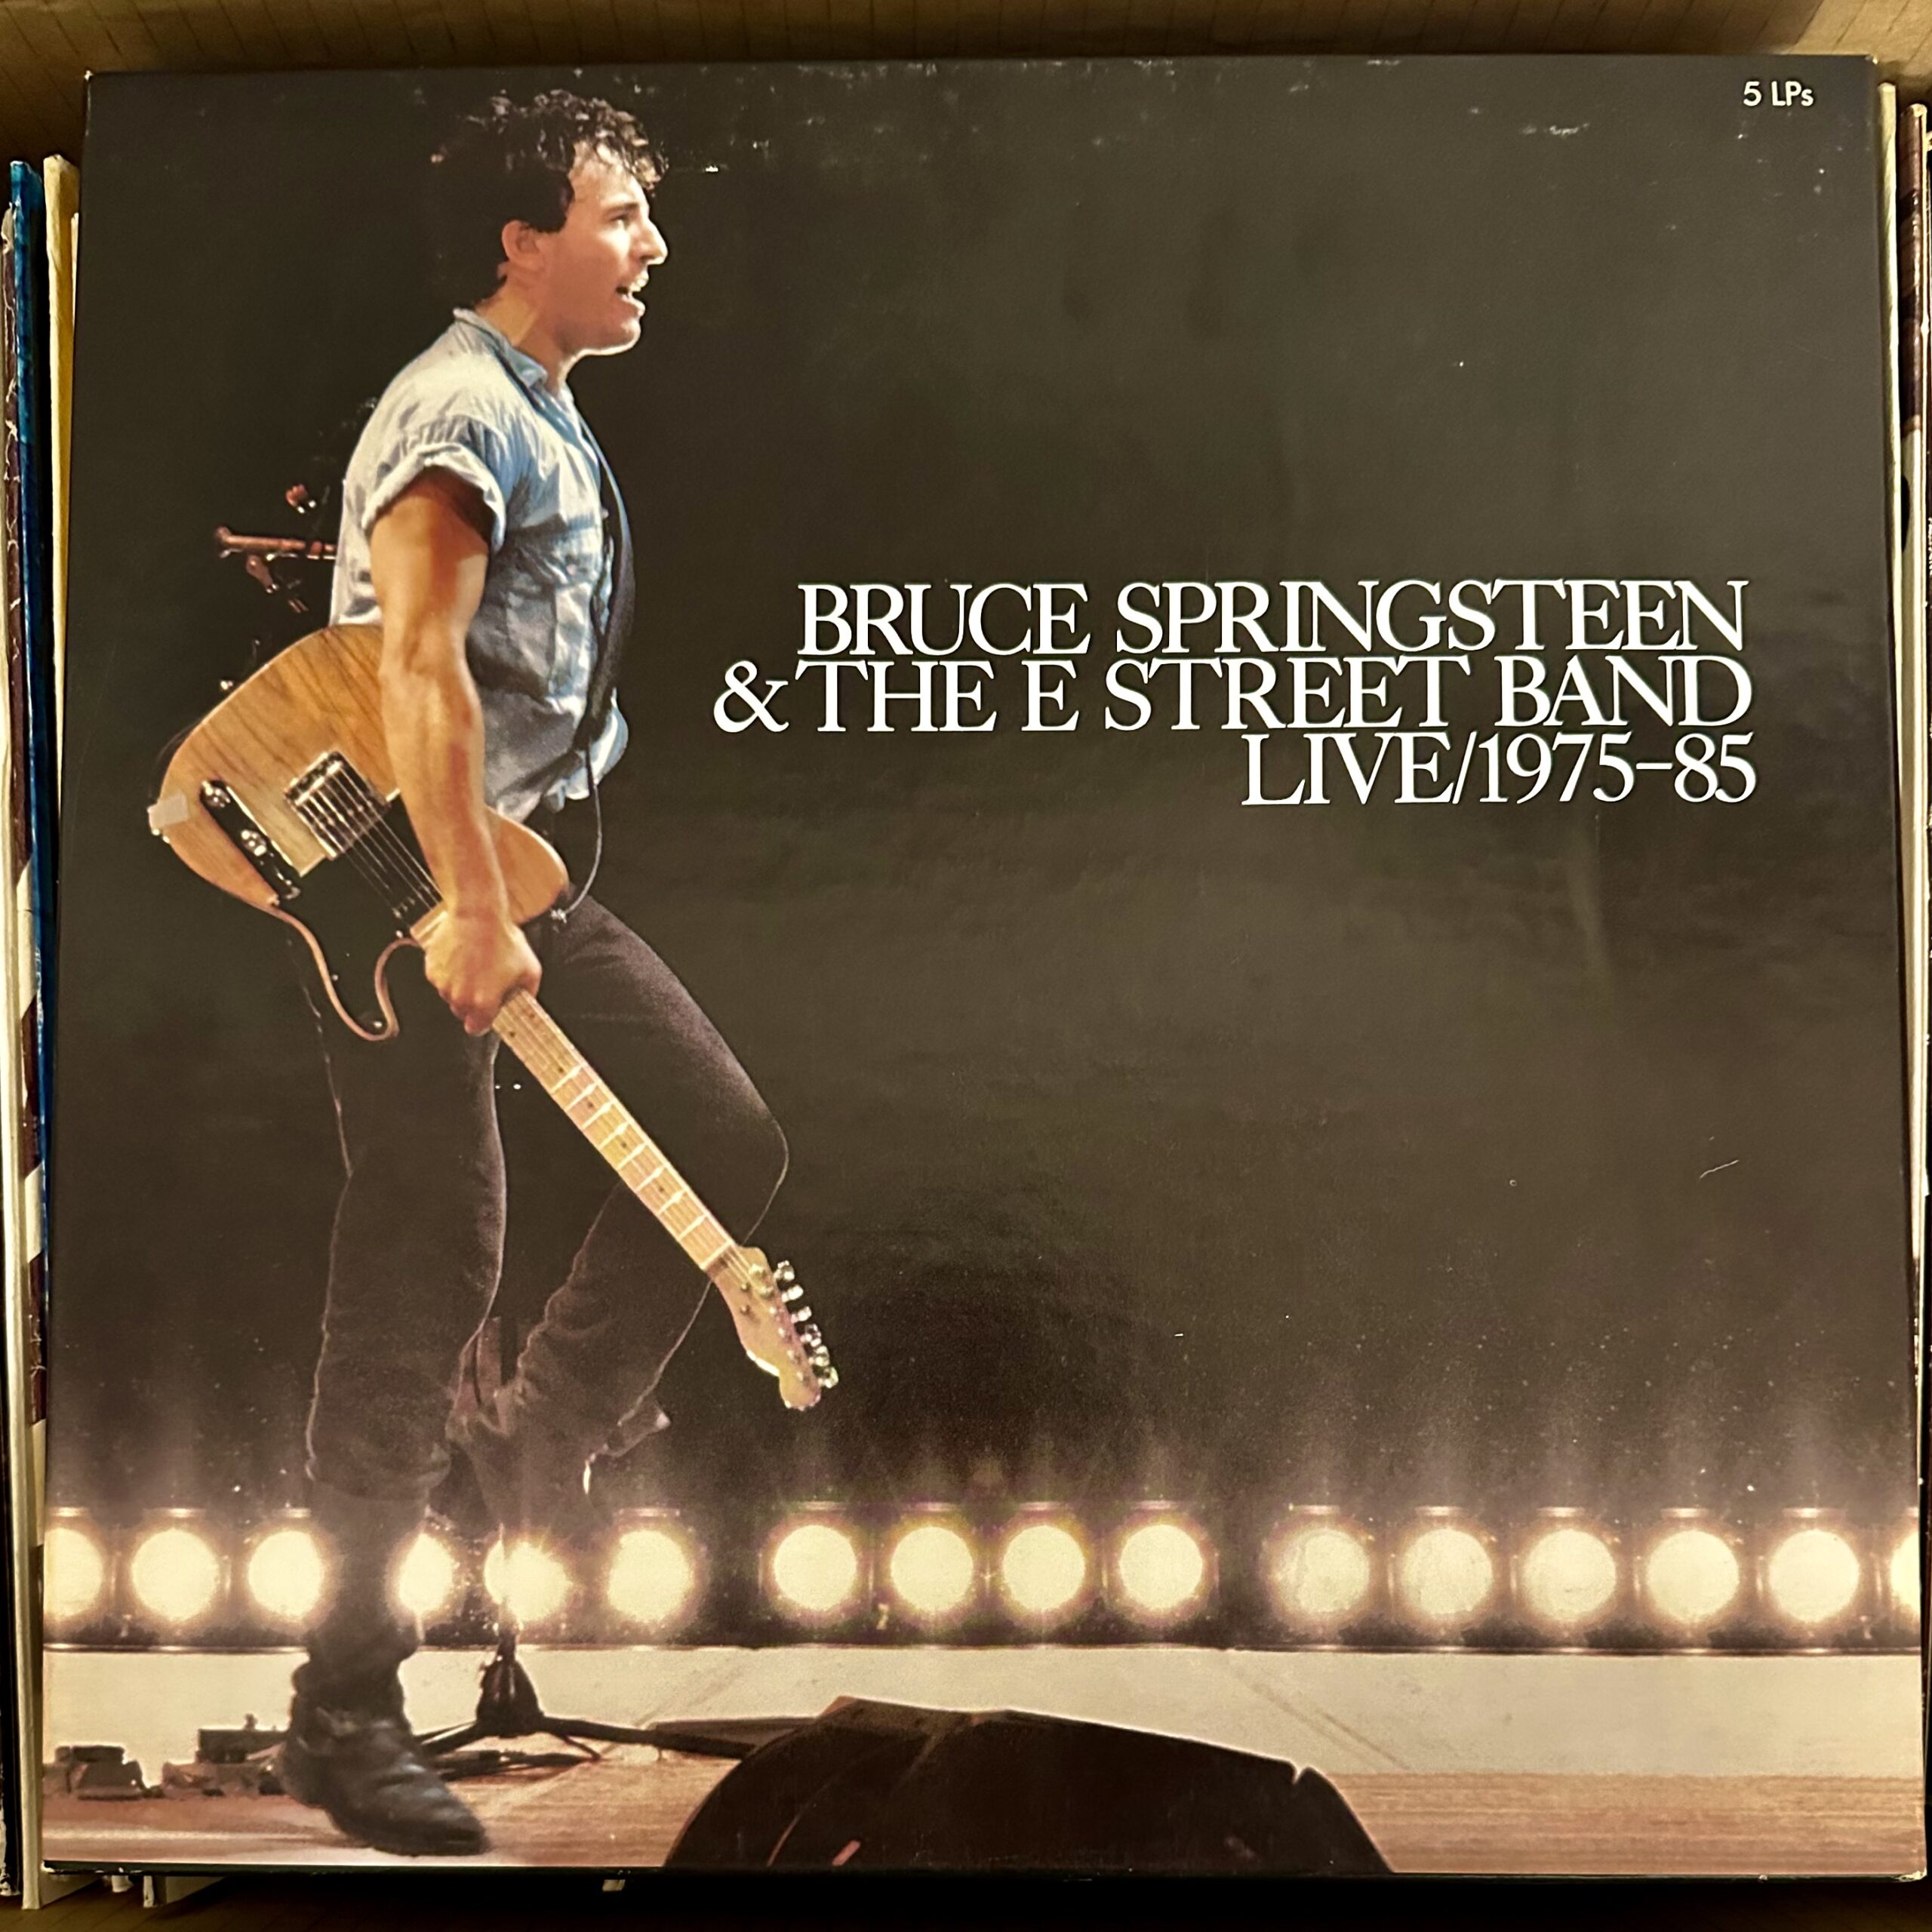 Live 1975–85 by Bruce Springsteen & the E Street Band